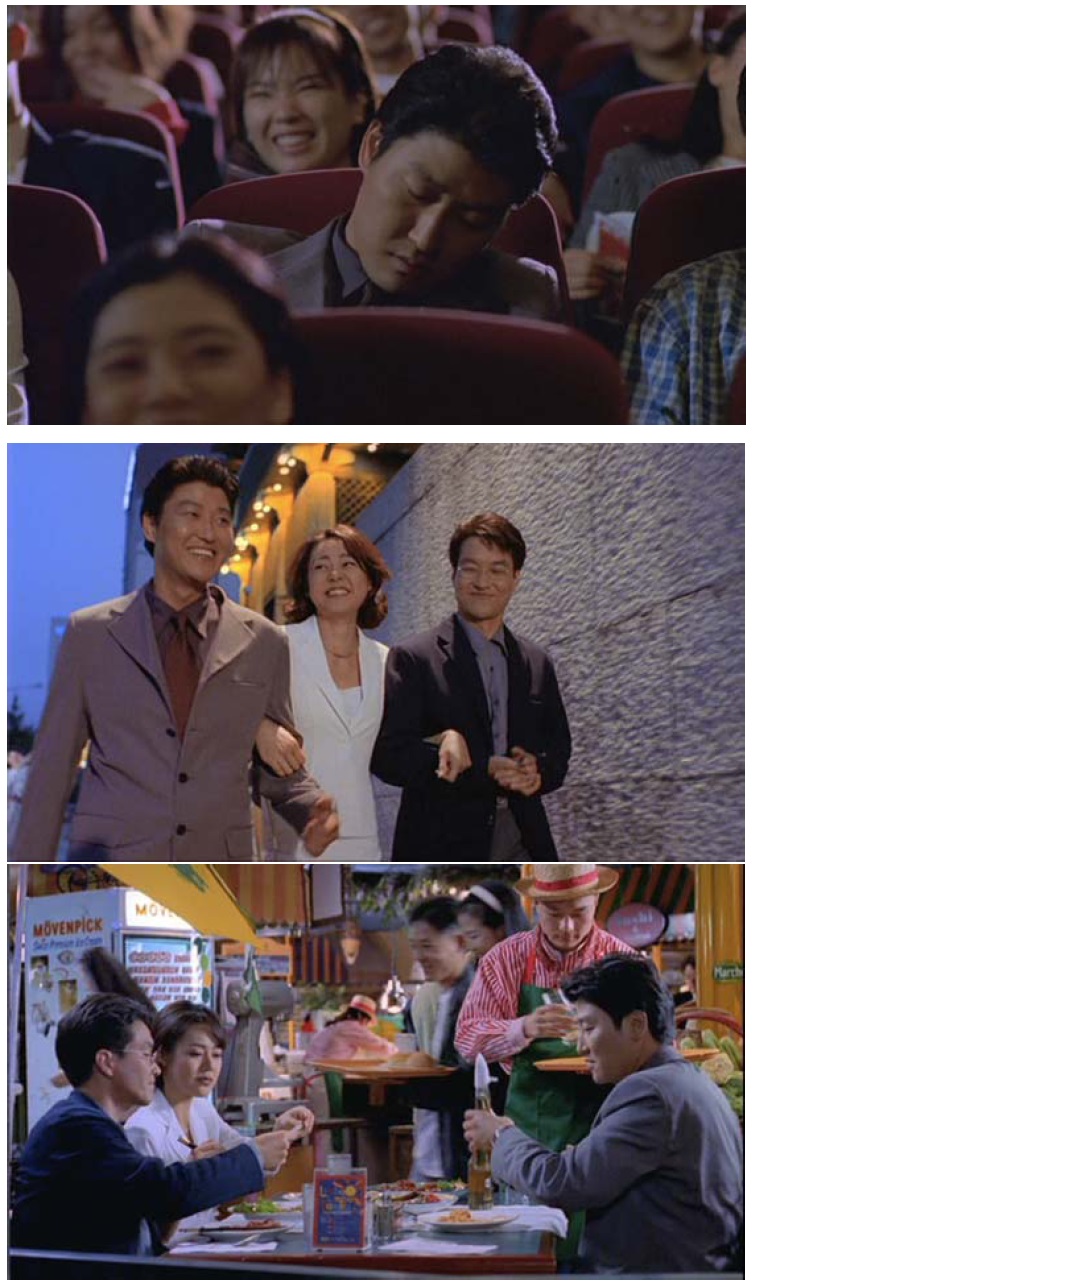 Film stills from the DVD Shiri (1999, Kang Je-gyu Films). Top: Lee (seated next to Jong and his girlfriend Myung-hyun) falling asleep at a live variety/comedy show; middle and bottom: Jong, Myung-hyun and Lee enjoying a night out on the town together.